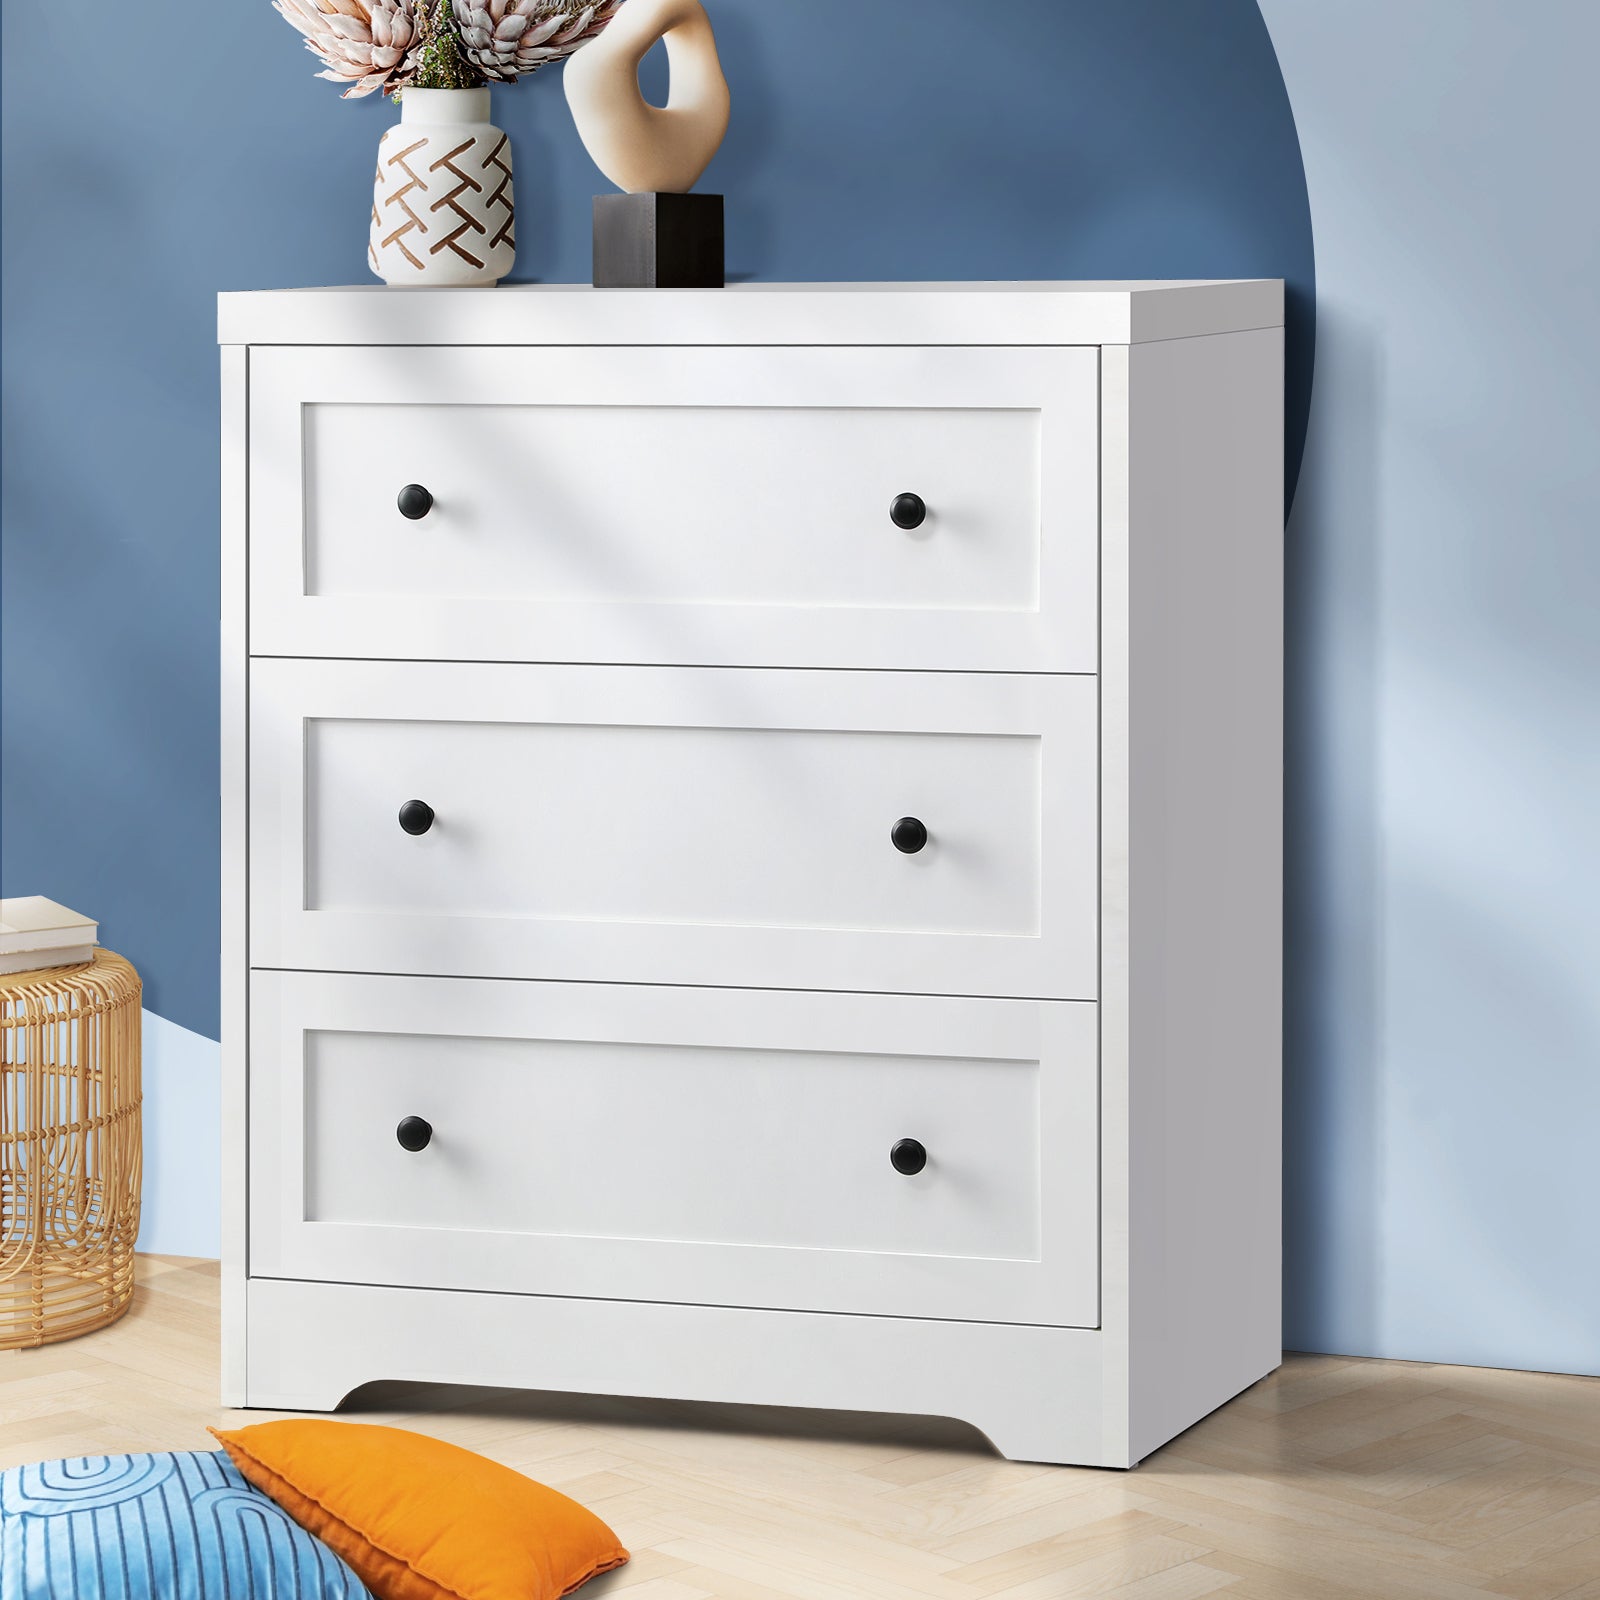 Oikiture White Chest of Drawers 3 Drawer Tallboy Bedside Table Storage Cabinet